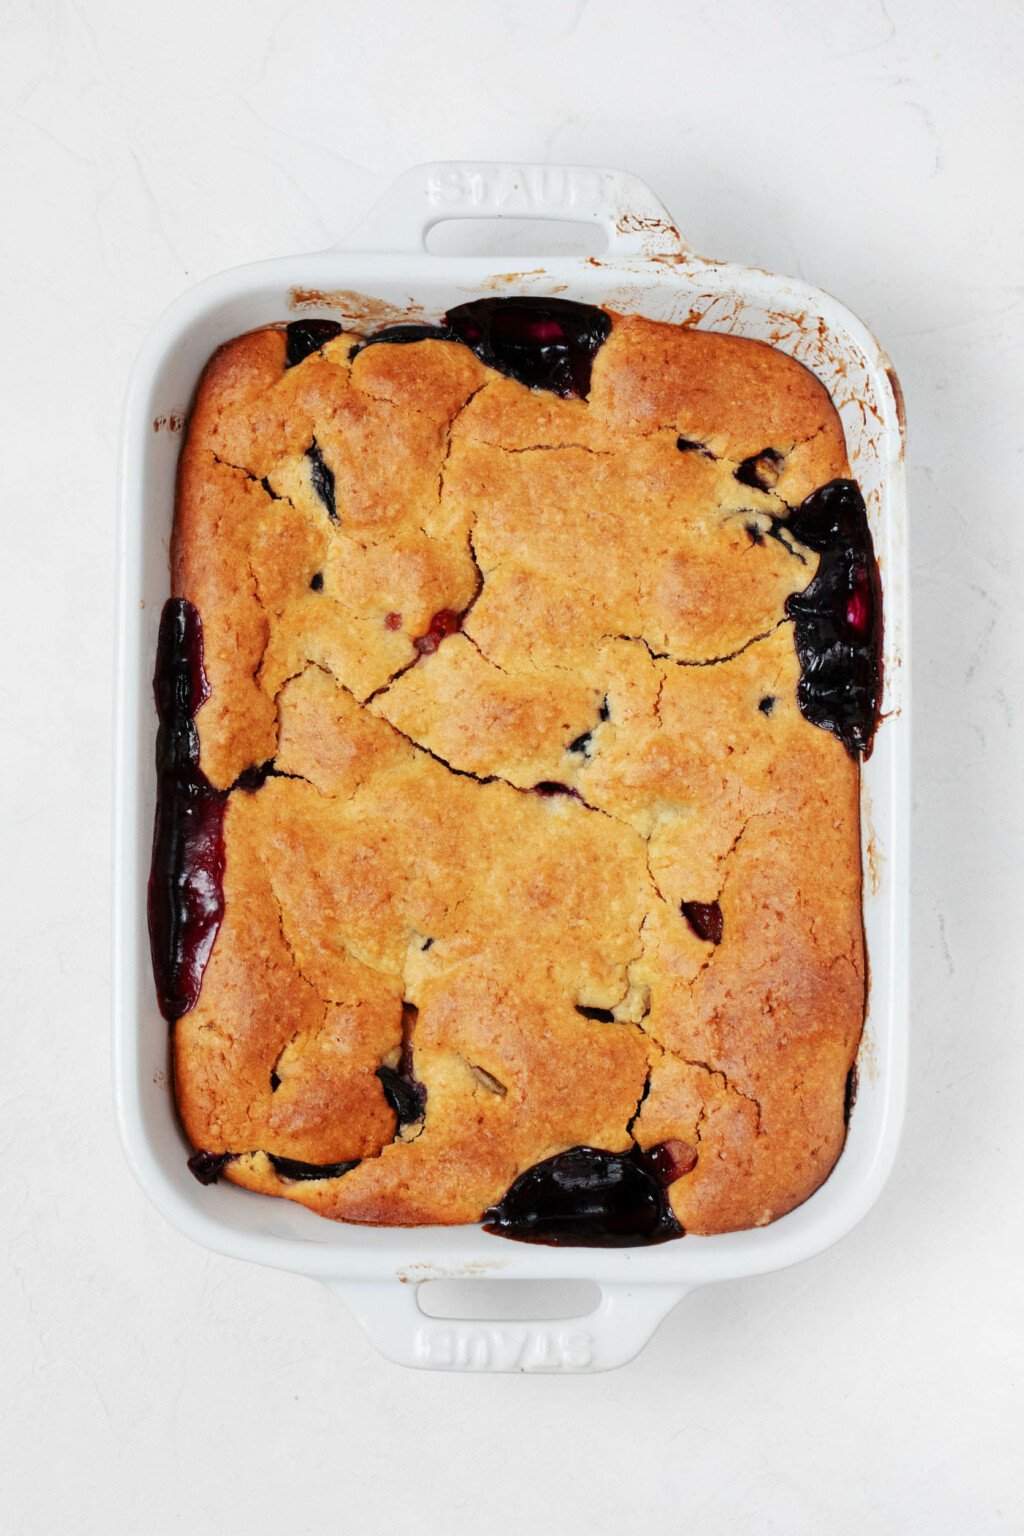 A white, rectangular baking dish holds a vegan peach cherry cobbler with a golden brown, cake-like topping.